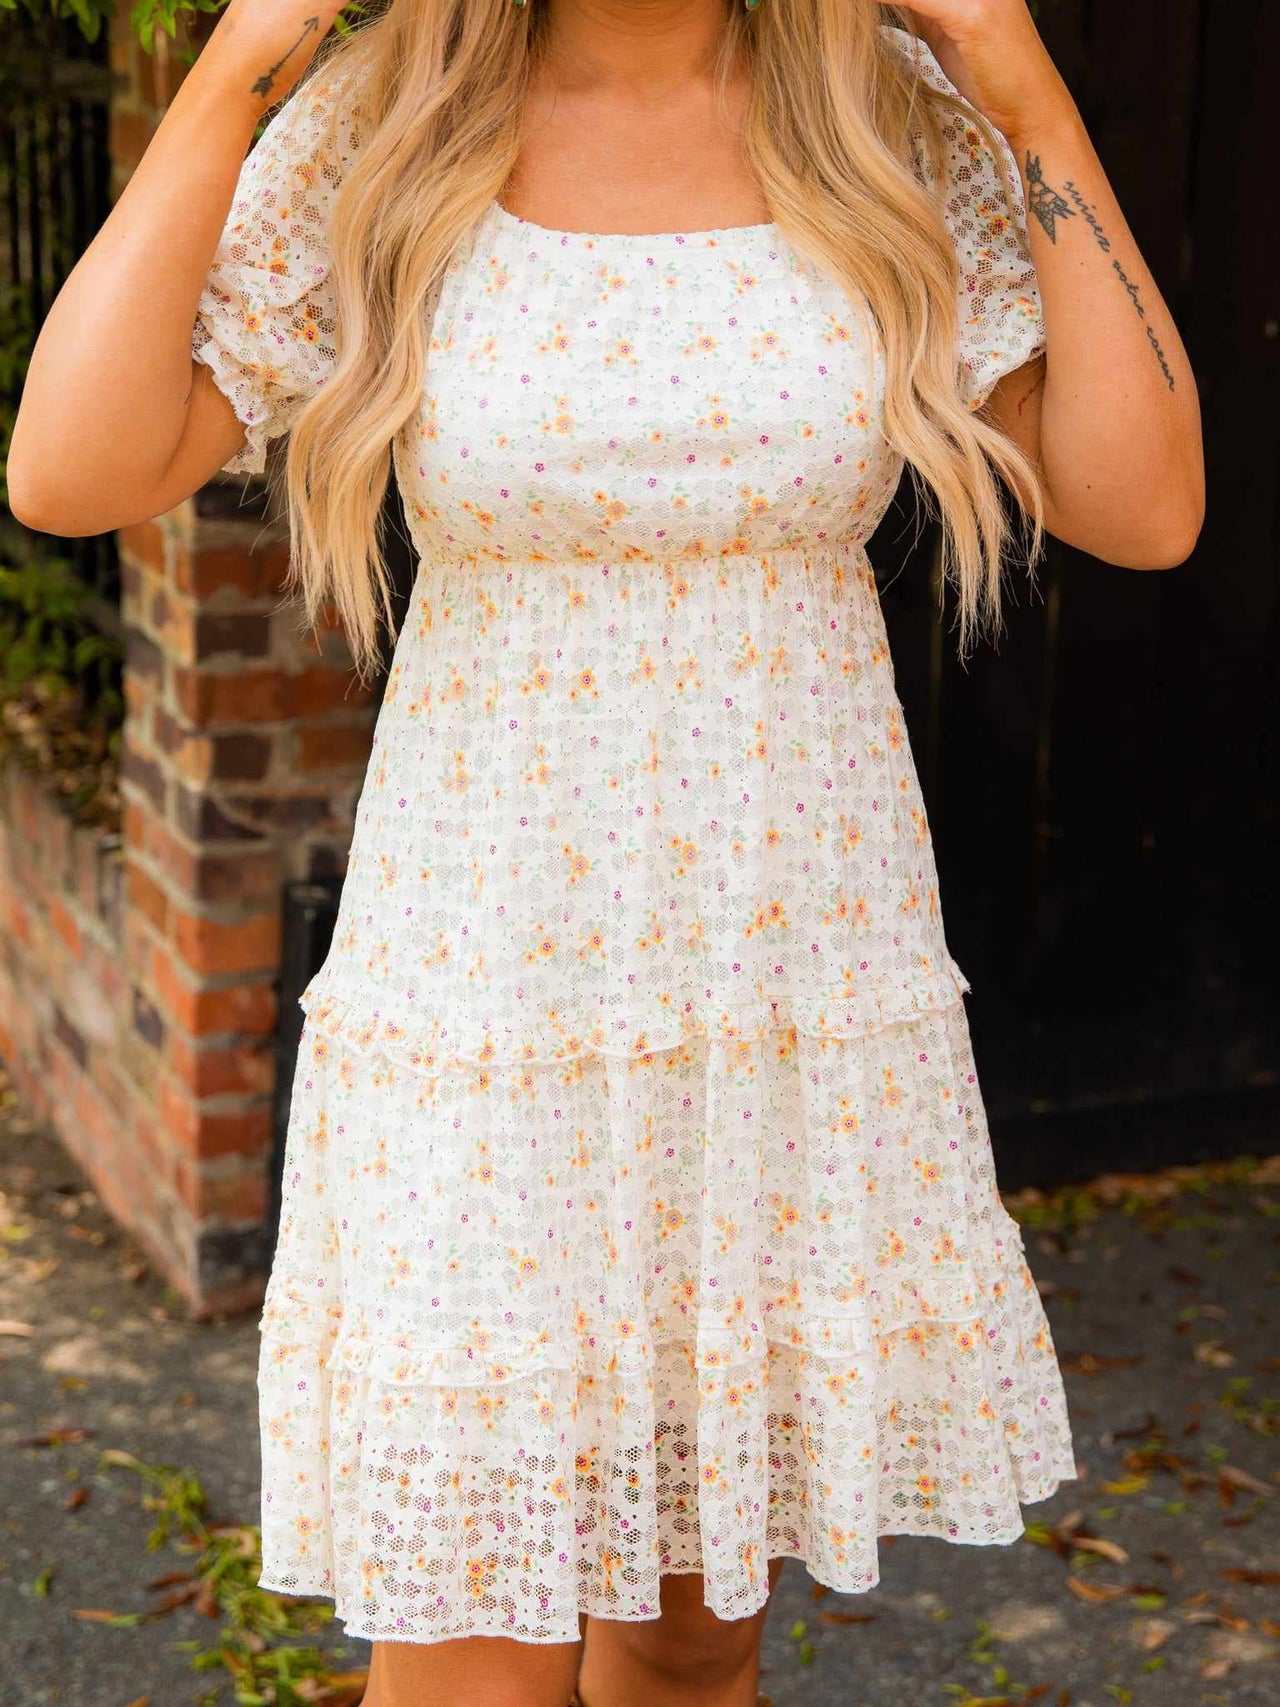 White floral dress with lace and daisies.